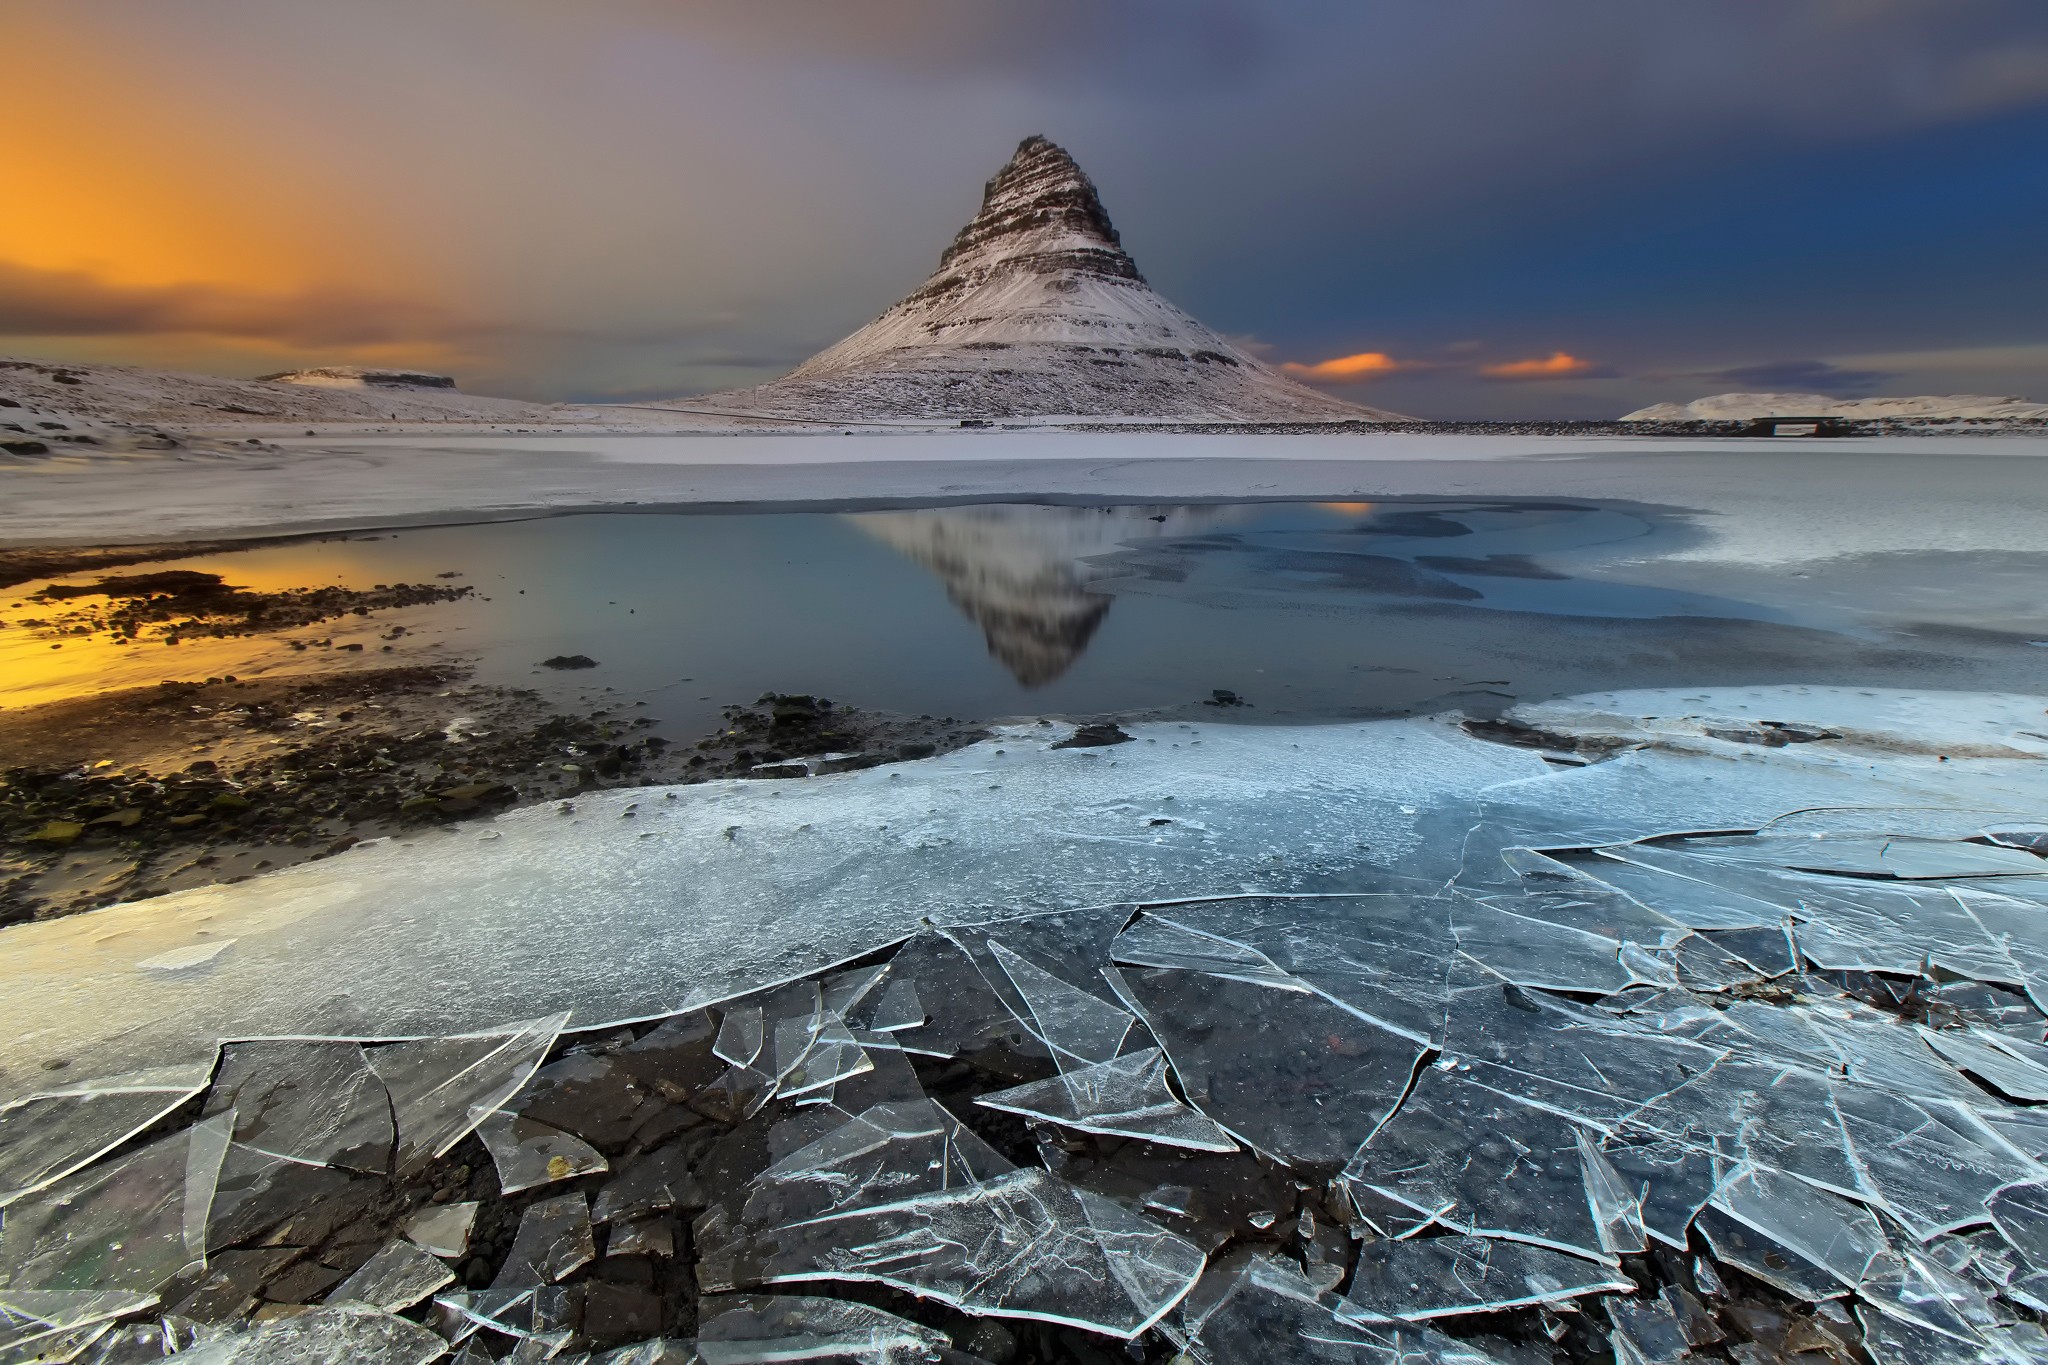 General 2048x1365 nature landscape mountains Iceland snow winter ice water sunset clouds reflection Kirkjufell nordic landscapes